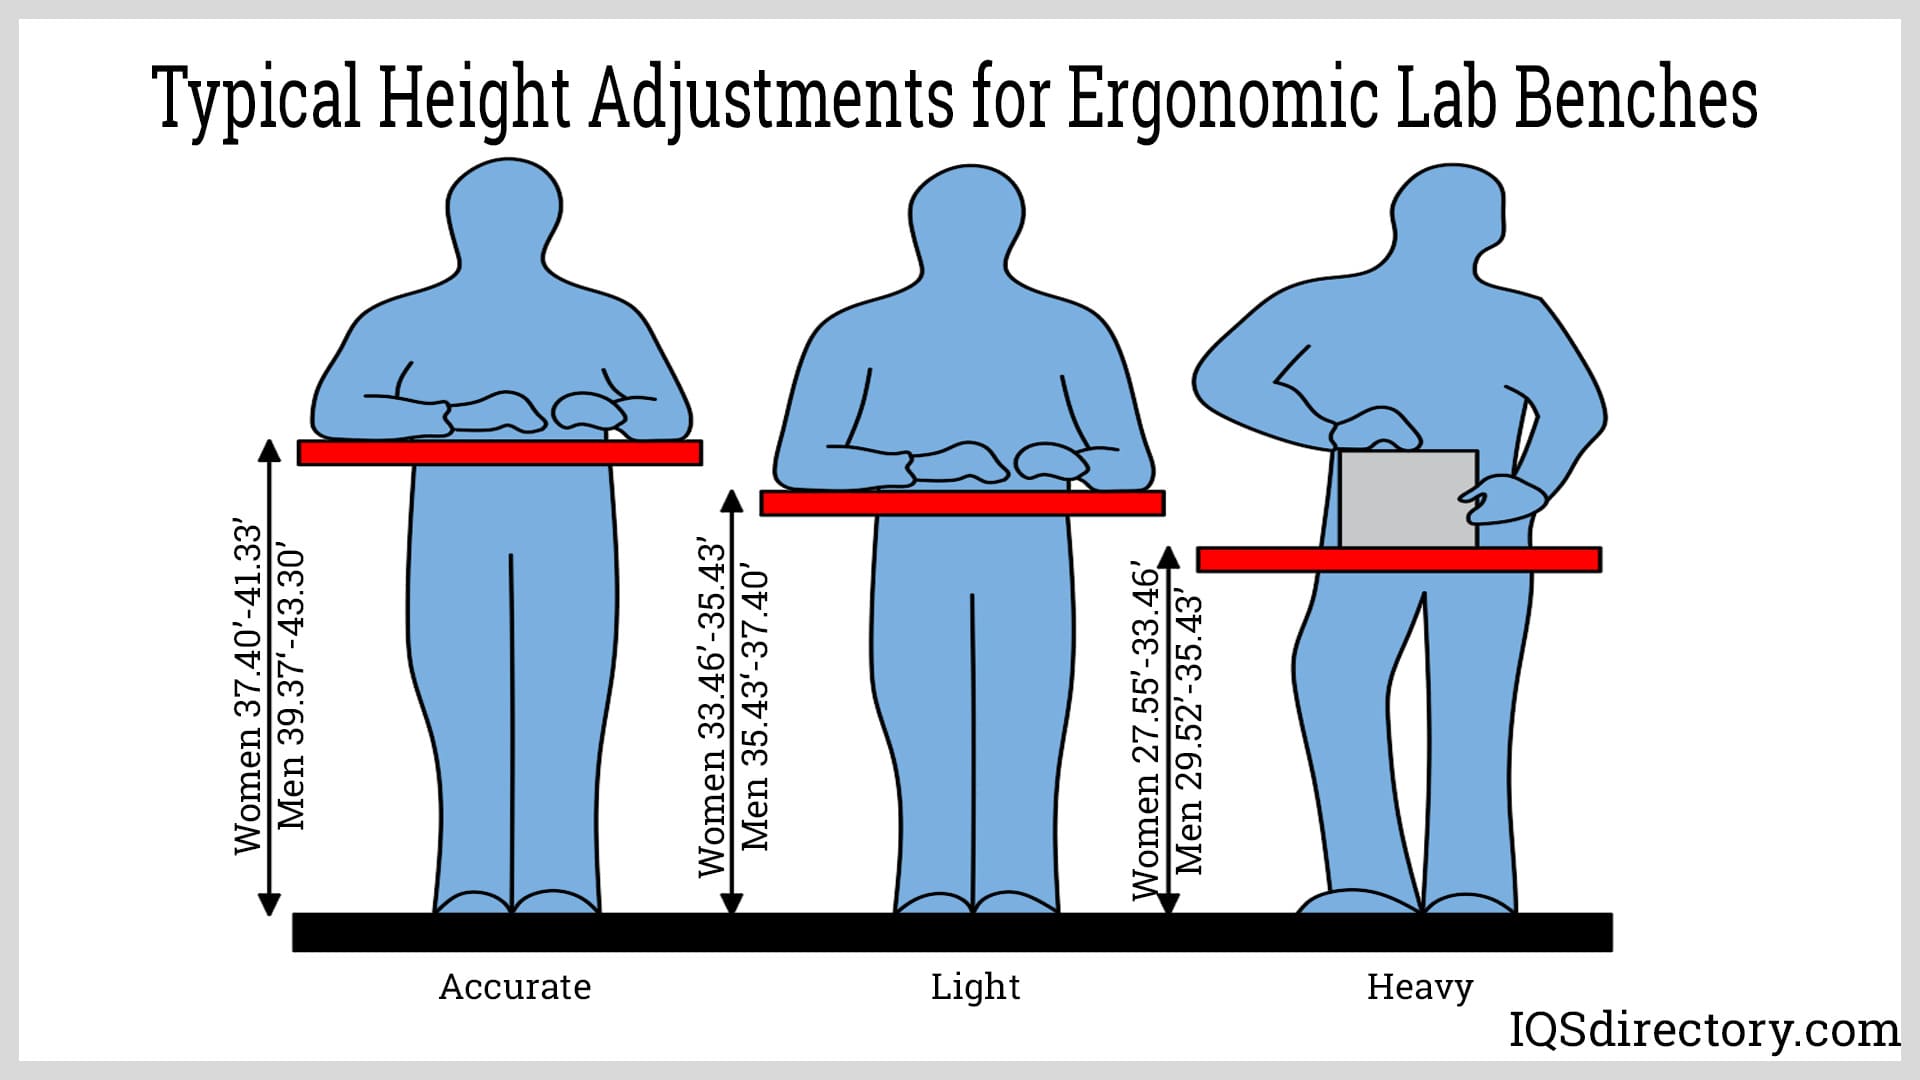 Typical Height Adjustments for Ergonomic Lab Benches